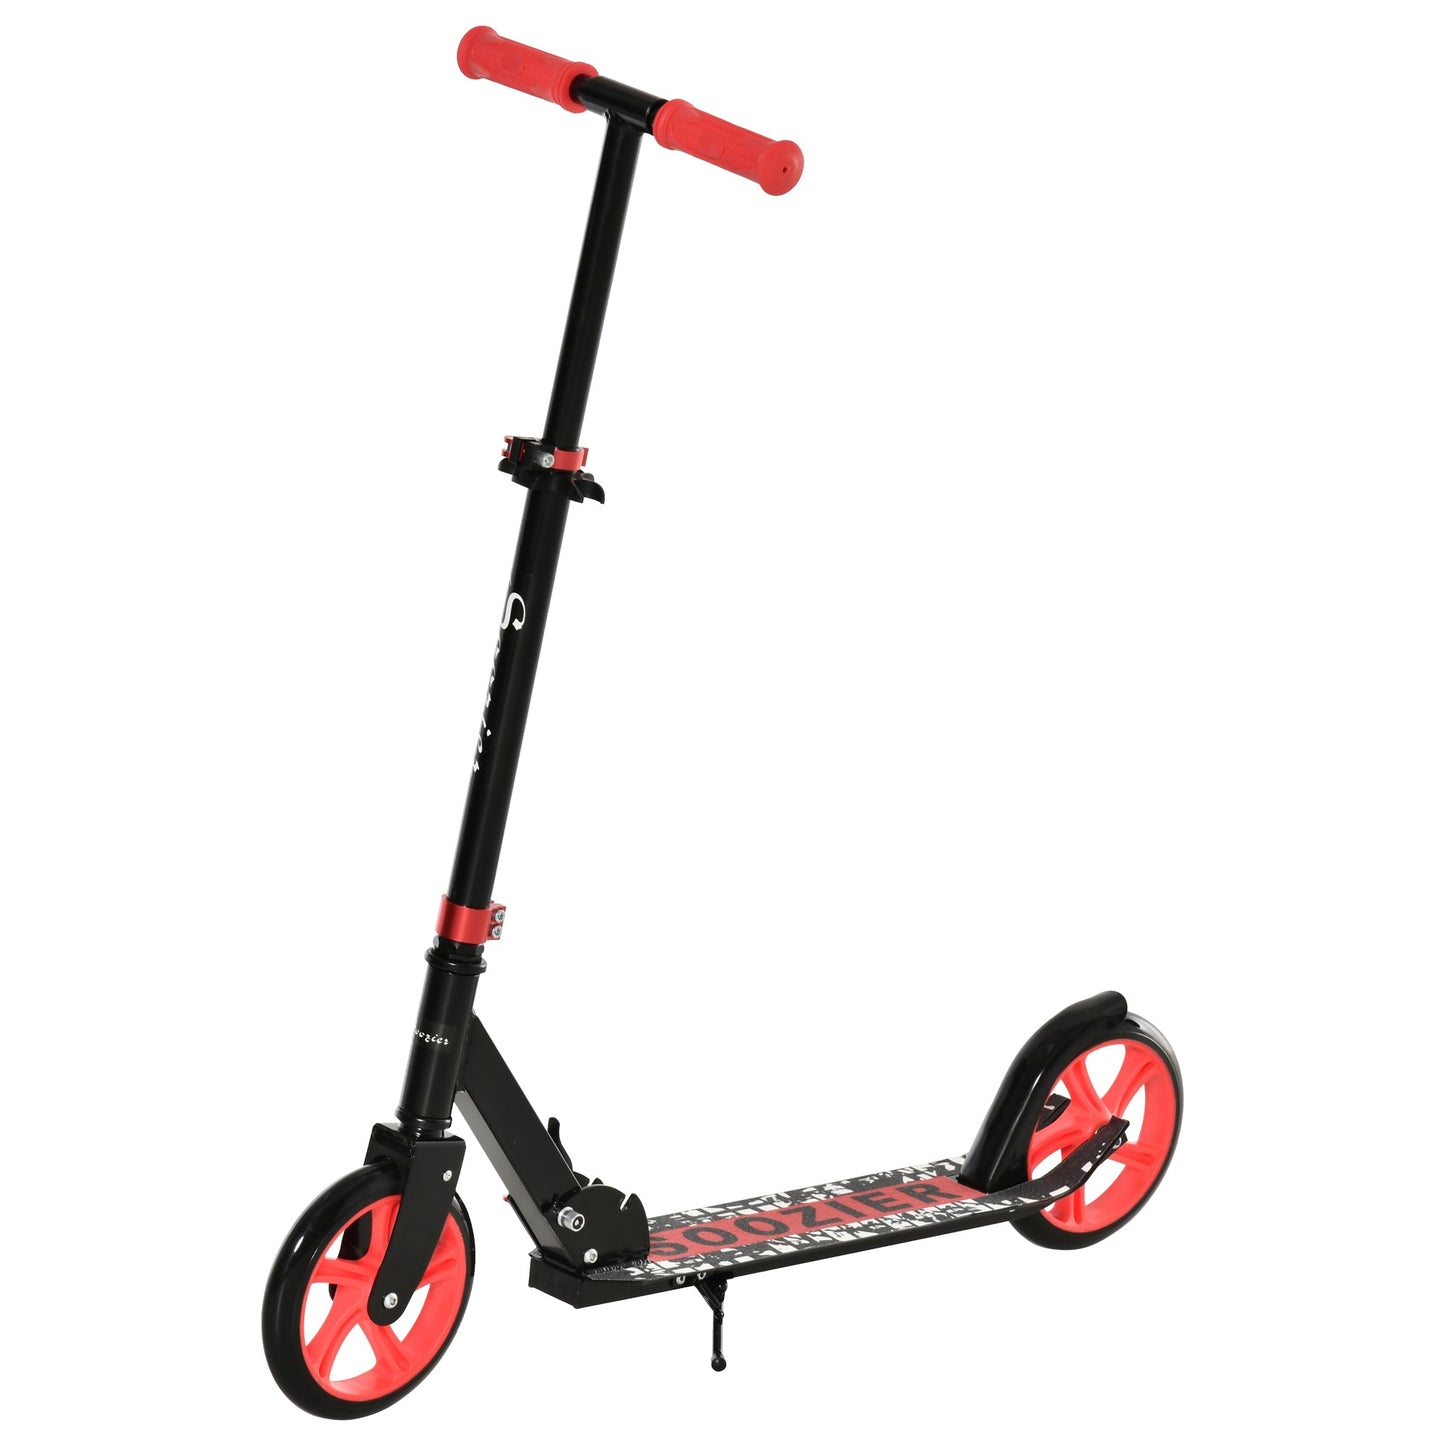 Miscellaneous-Foldable Kick Scooter for 14+ Adults and Kids w/ Lightweight Aluminum Frame, Adjustable Handlebars, 7.75'' Big Wheels and Rear Wheel Brake - Outdoor Style Company